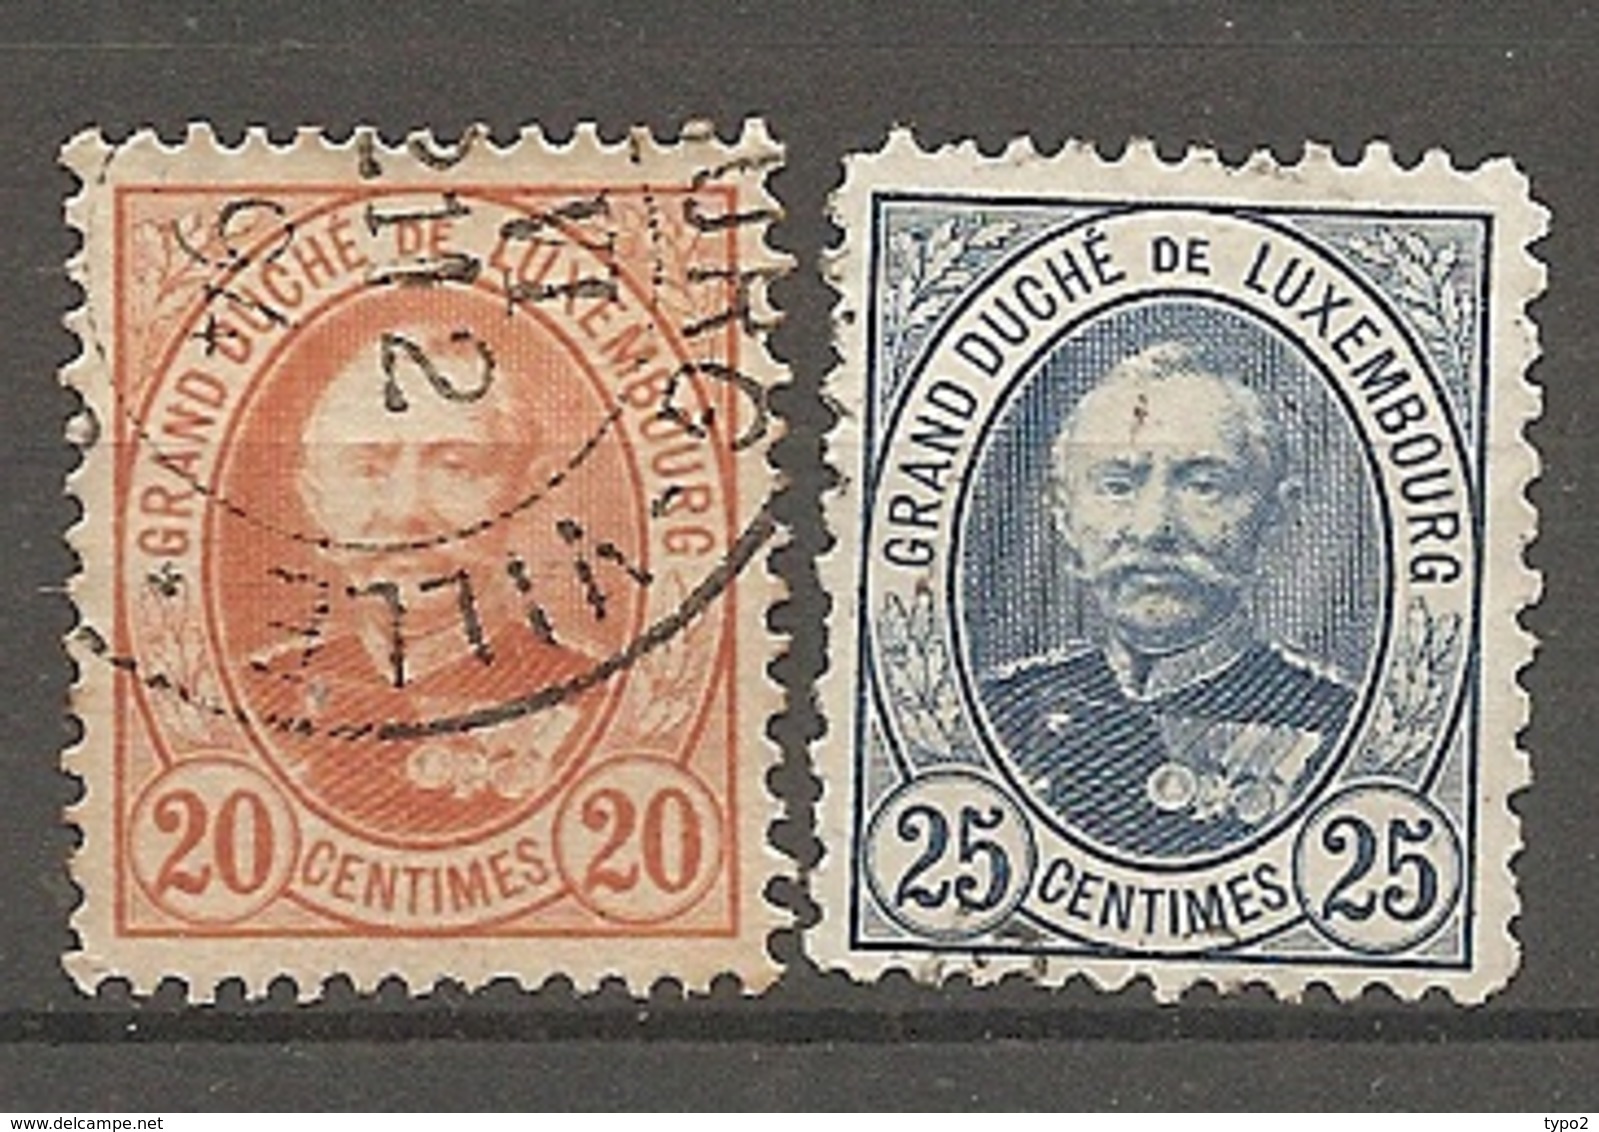 LUX 1891 Yv. N° 61,62  (o)  20 C, 15c   Adolphe Ier Cote 1,25 Euro BE  2 Scans - 1891 Adolfo Di Fronte